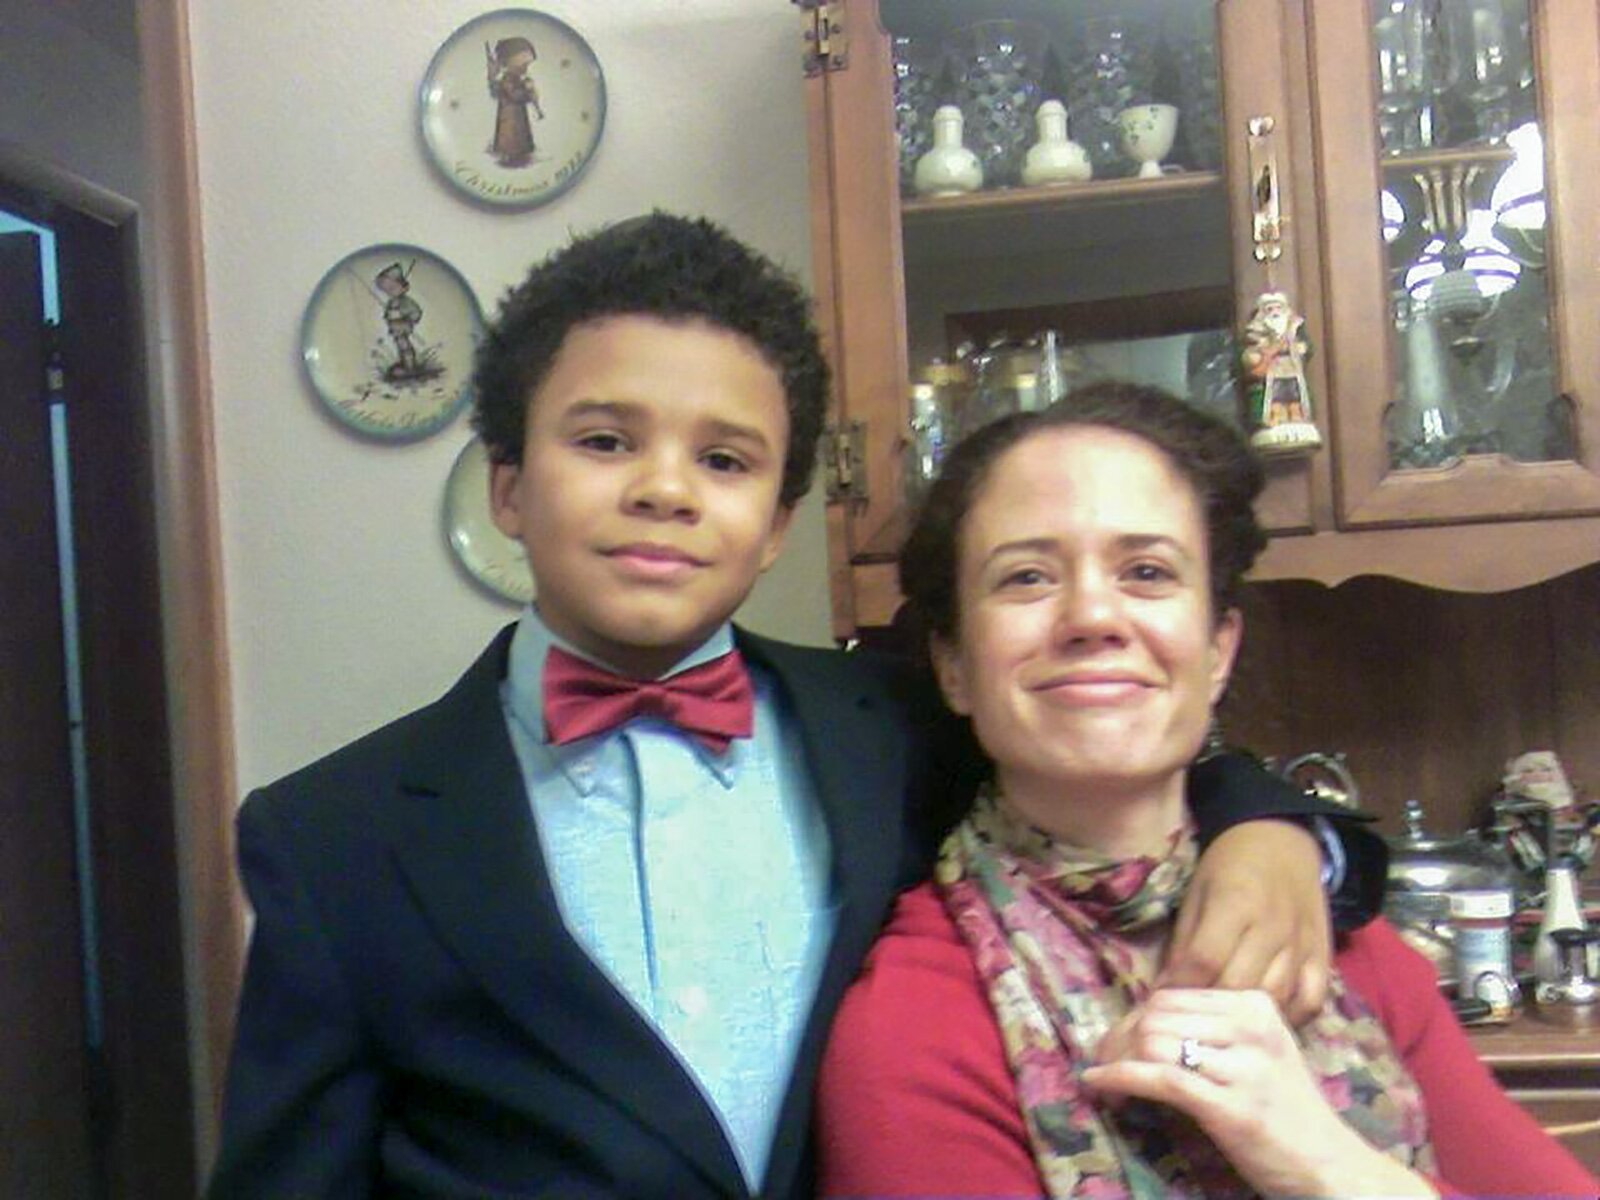 Jonah Payne and his mother Gwen La Croix. Jonah killed himself at age 17 while he was a student at the Early College Alliance at Eastern Michigan University.